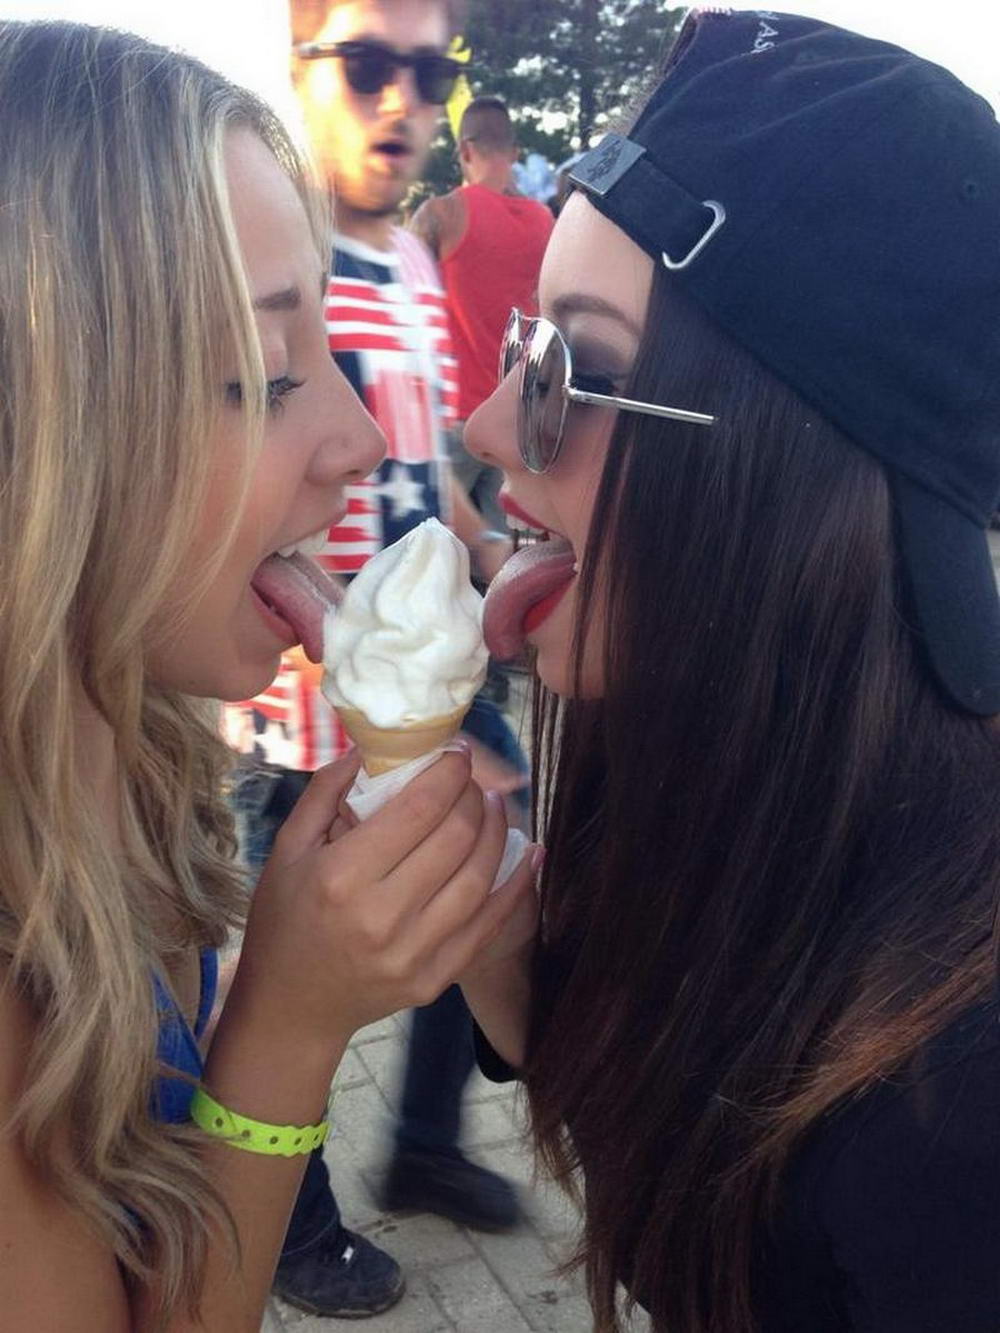 two girls lick ice cream cone while guy watches in the background